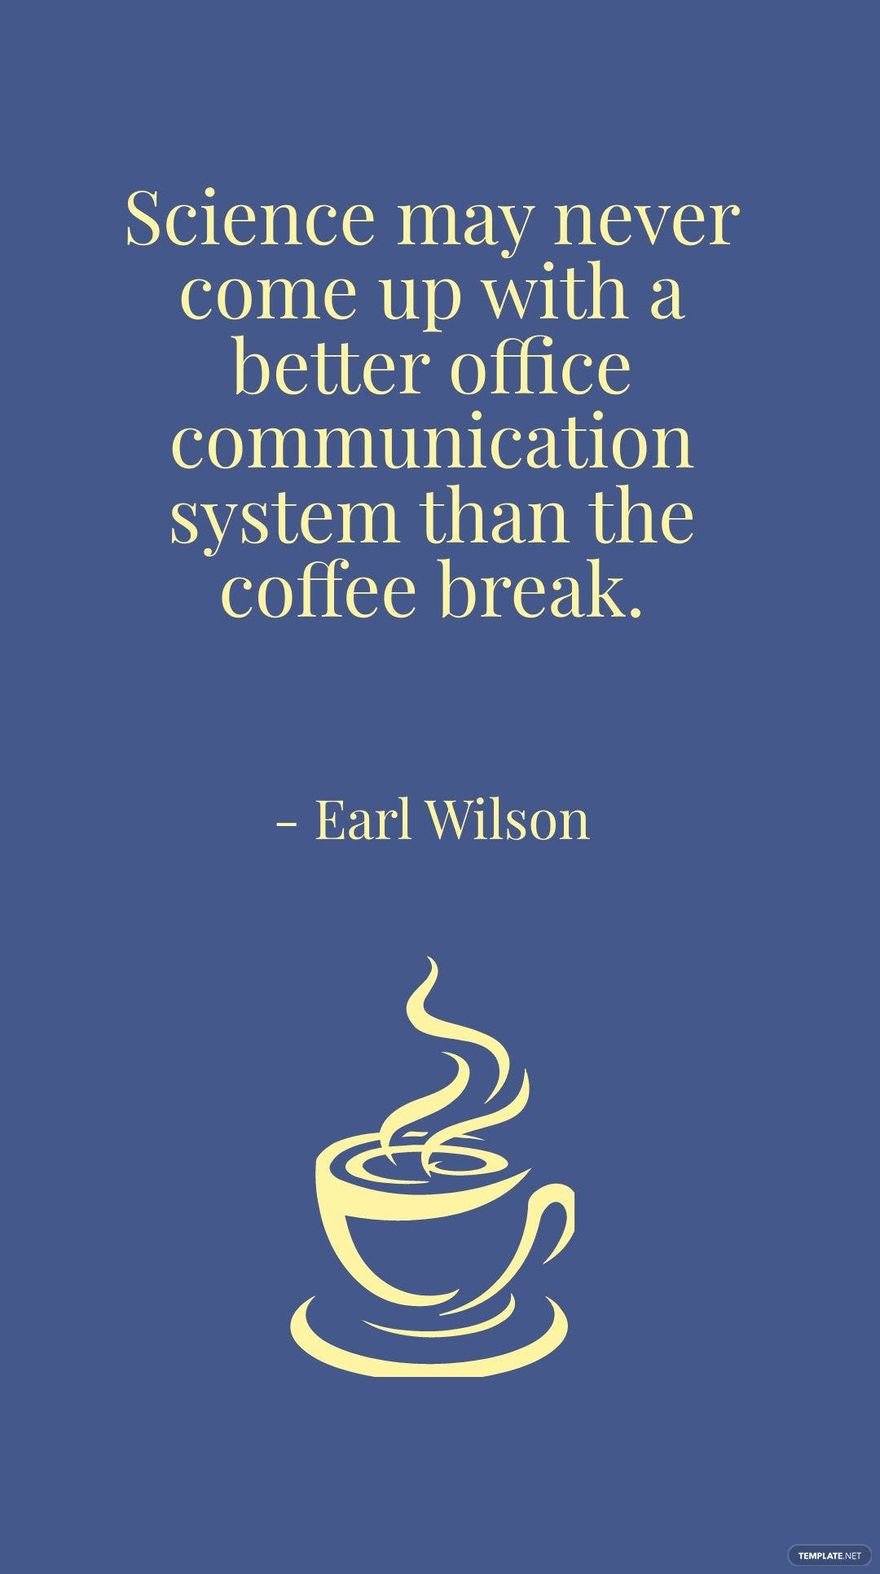 Free Earl Wilson - Science may never come up with a better office communication system than the coffee break.